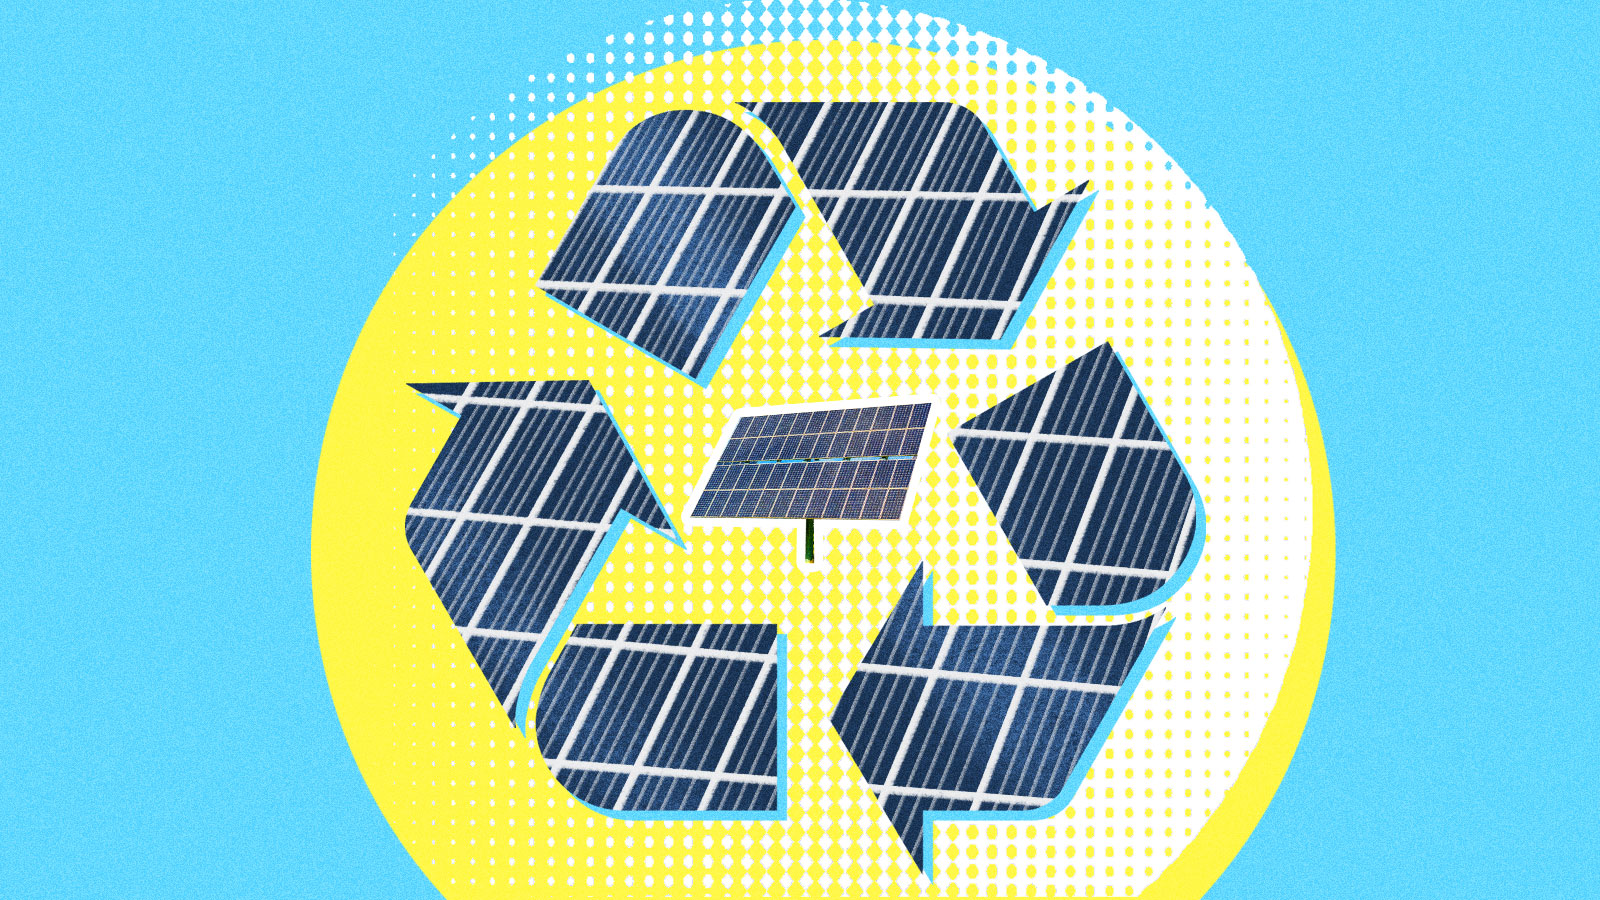 What will happen to solar panels after their useful lives are over?